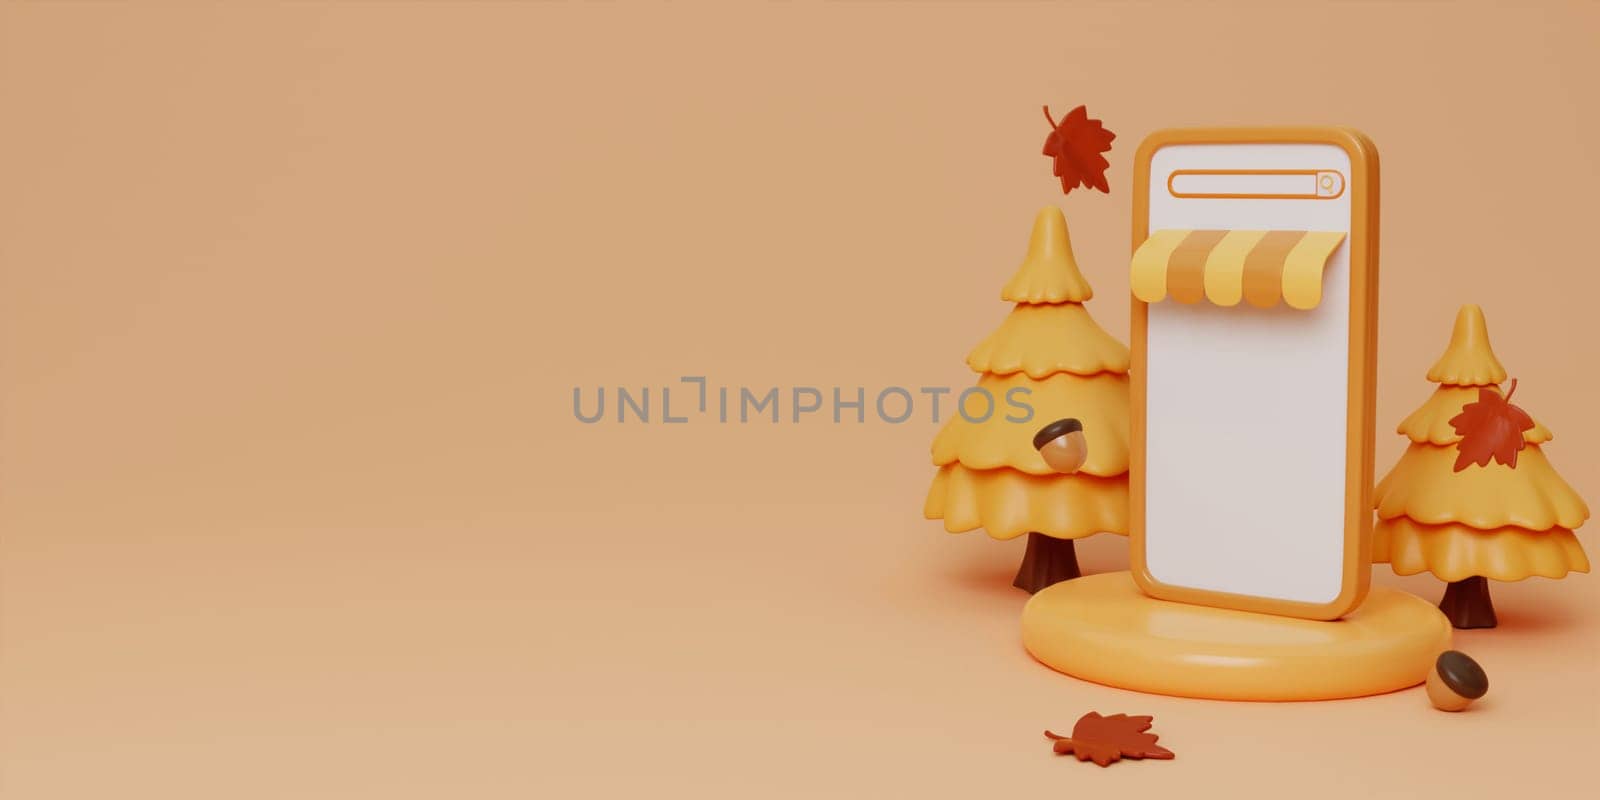 Hello Autumn with phone, leaves, pumpkins, walnut background. 3d Fall leaves for the design of Fall banners, posters, advertisements, cards, sales. 3d render illustration. by meepiangraphic